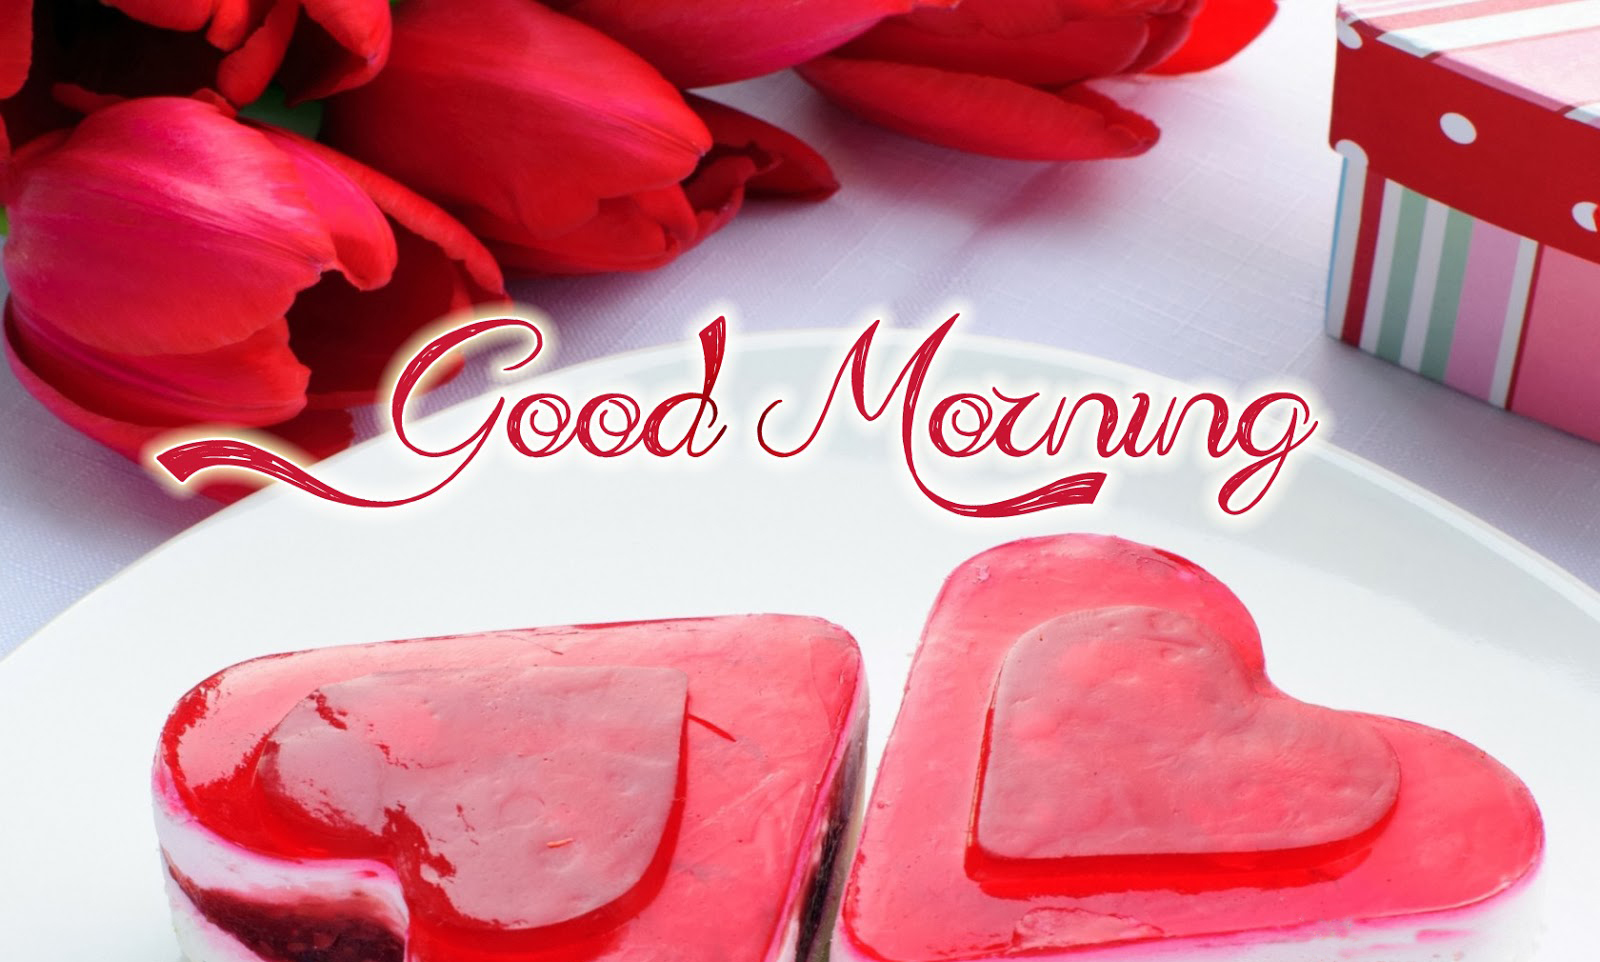 By Stephen Ments Off On Good Morning HD Love Wallpaper